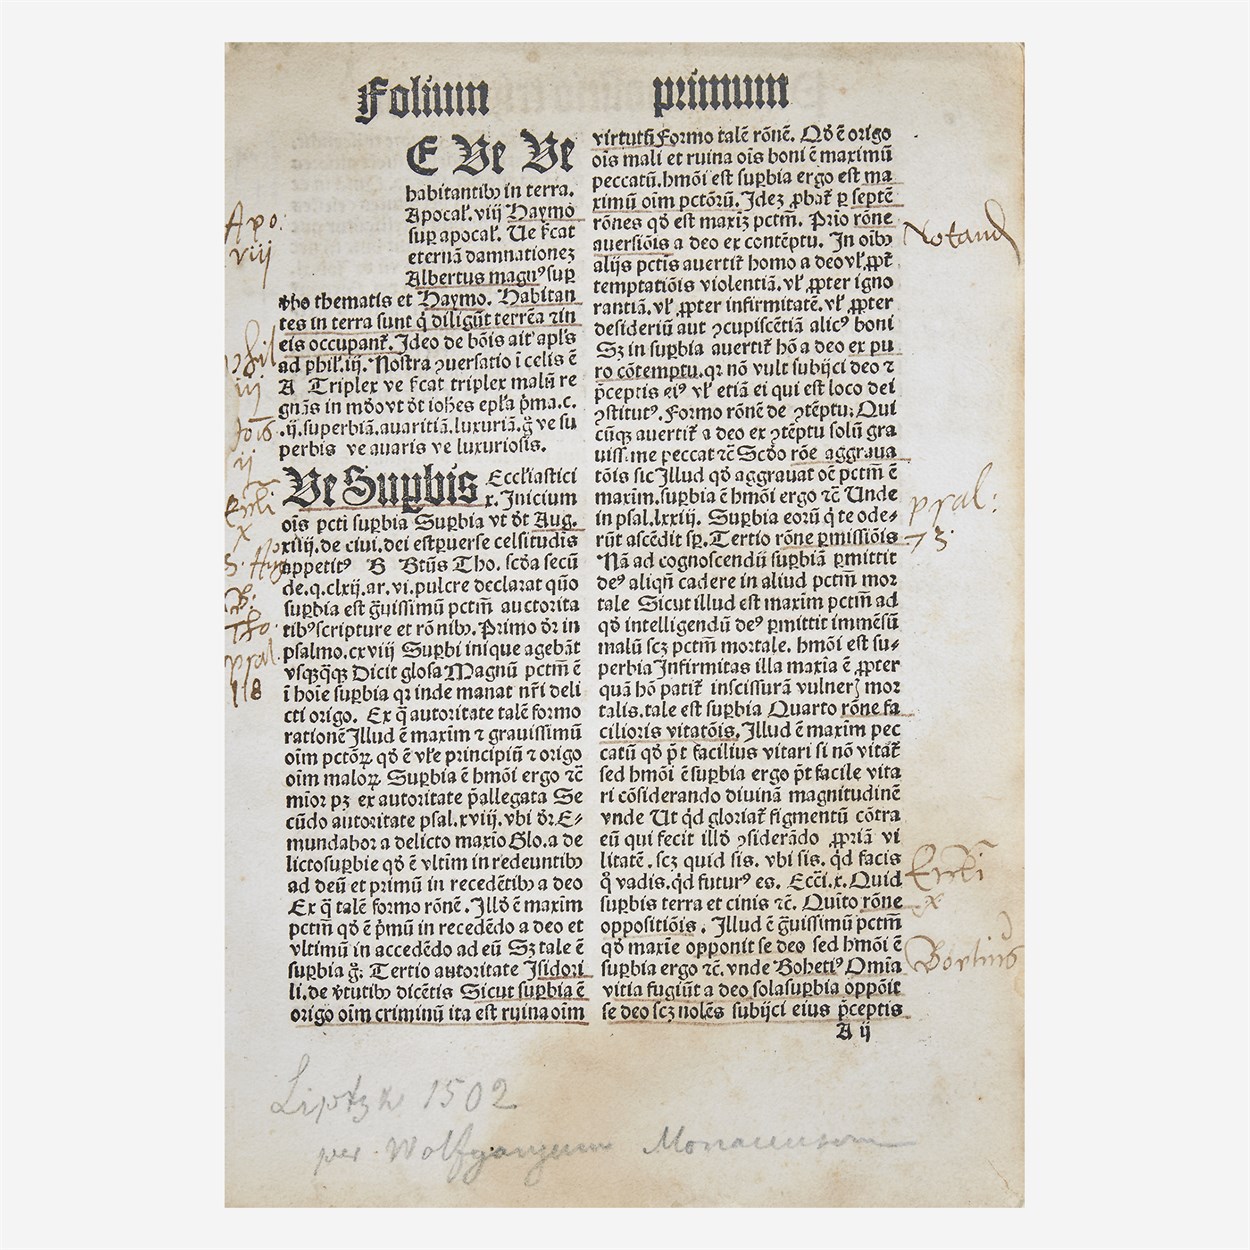 Lot 42 - [Early Printing] (Morgenstern, Georg)